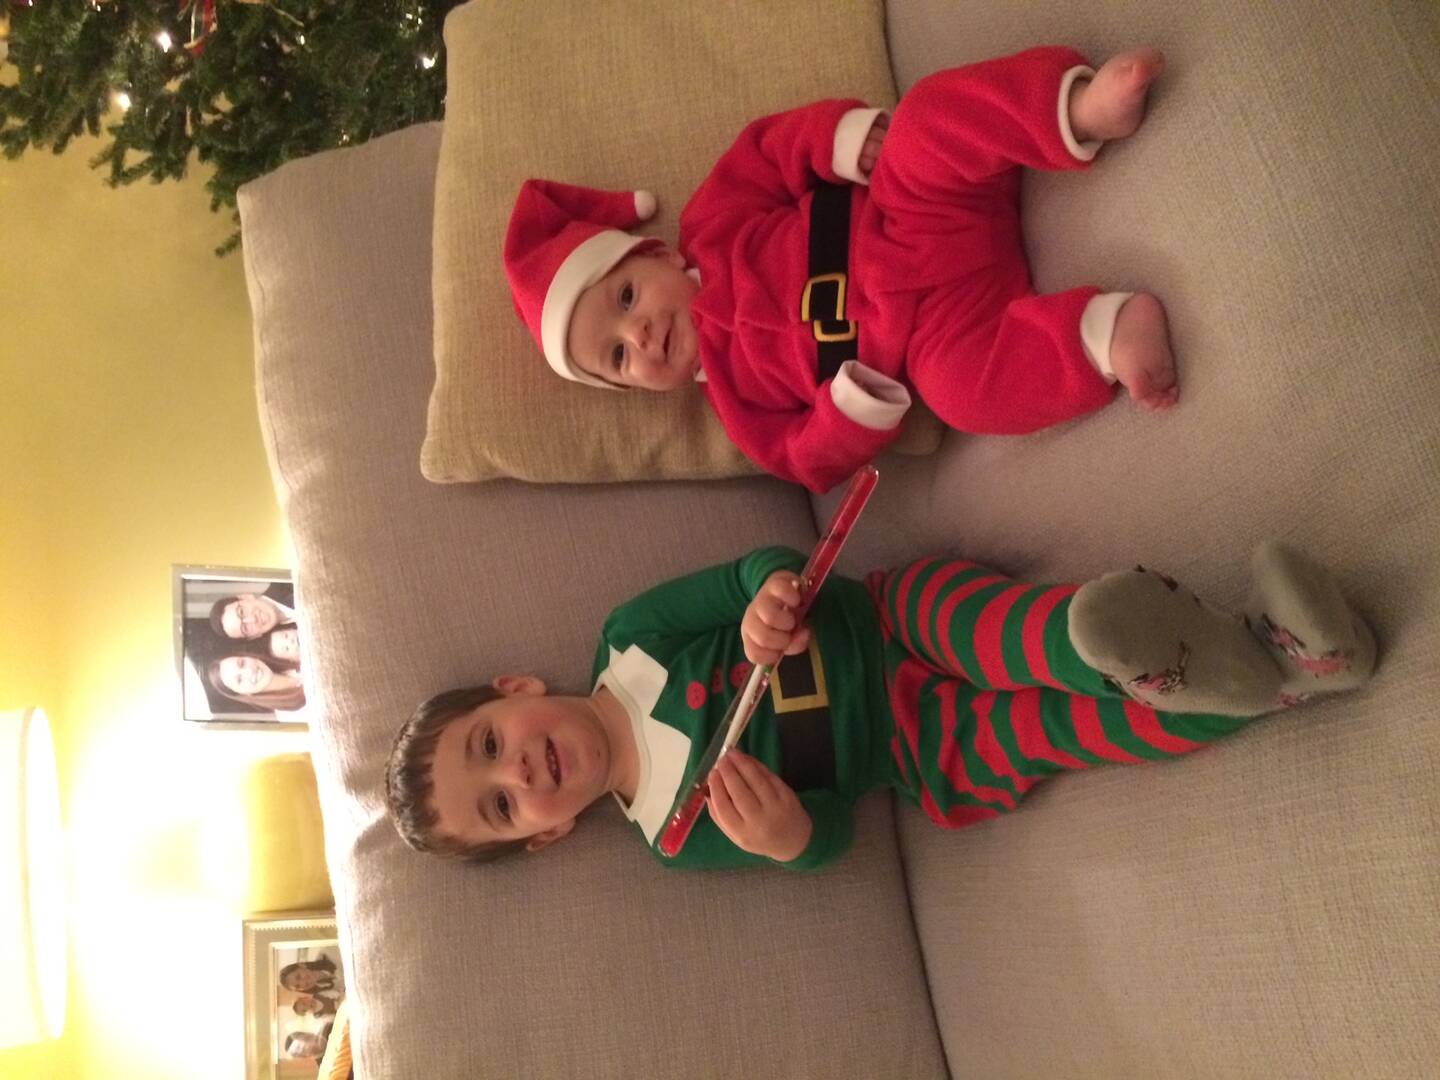 Heather Trotta's two children at Christmas 2014